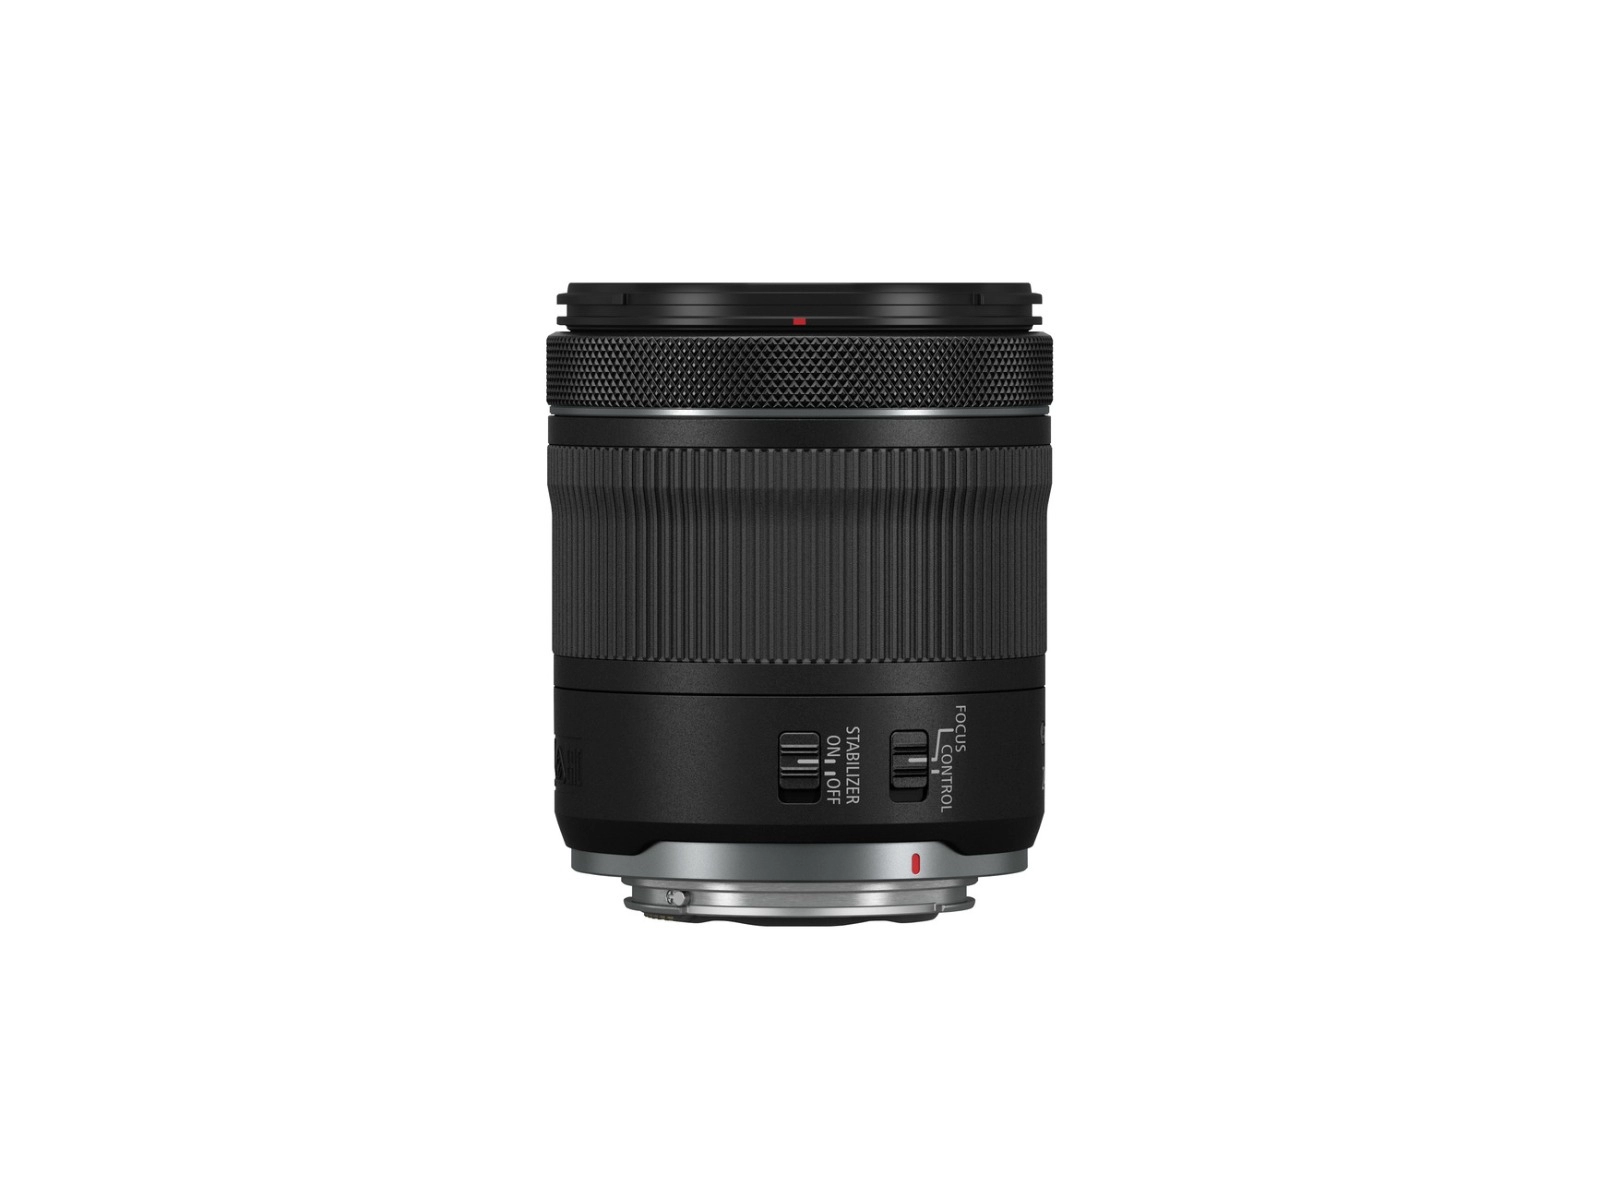 Zoom Lens Canon RF 24-105mm f/4-7.1 L IS STM (4111C005)